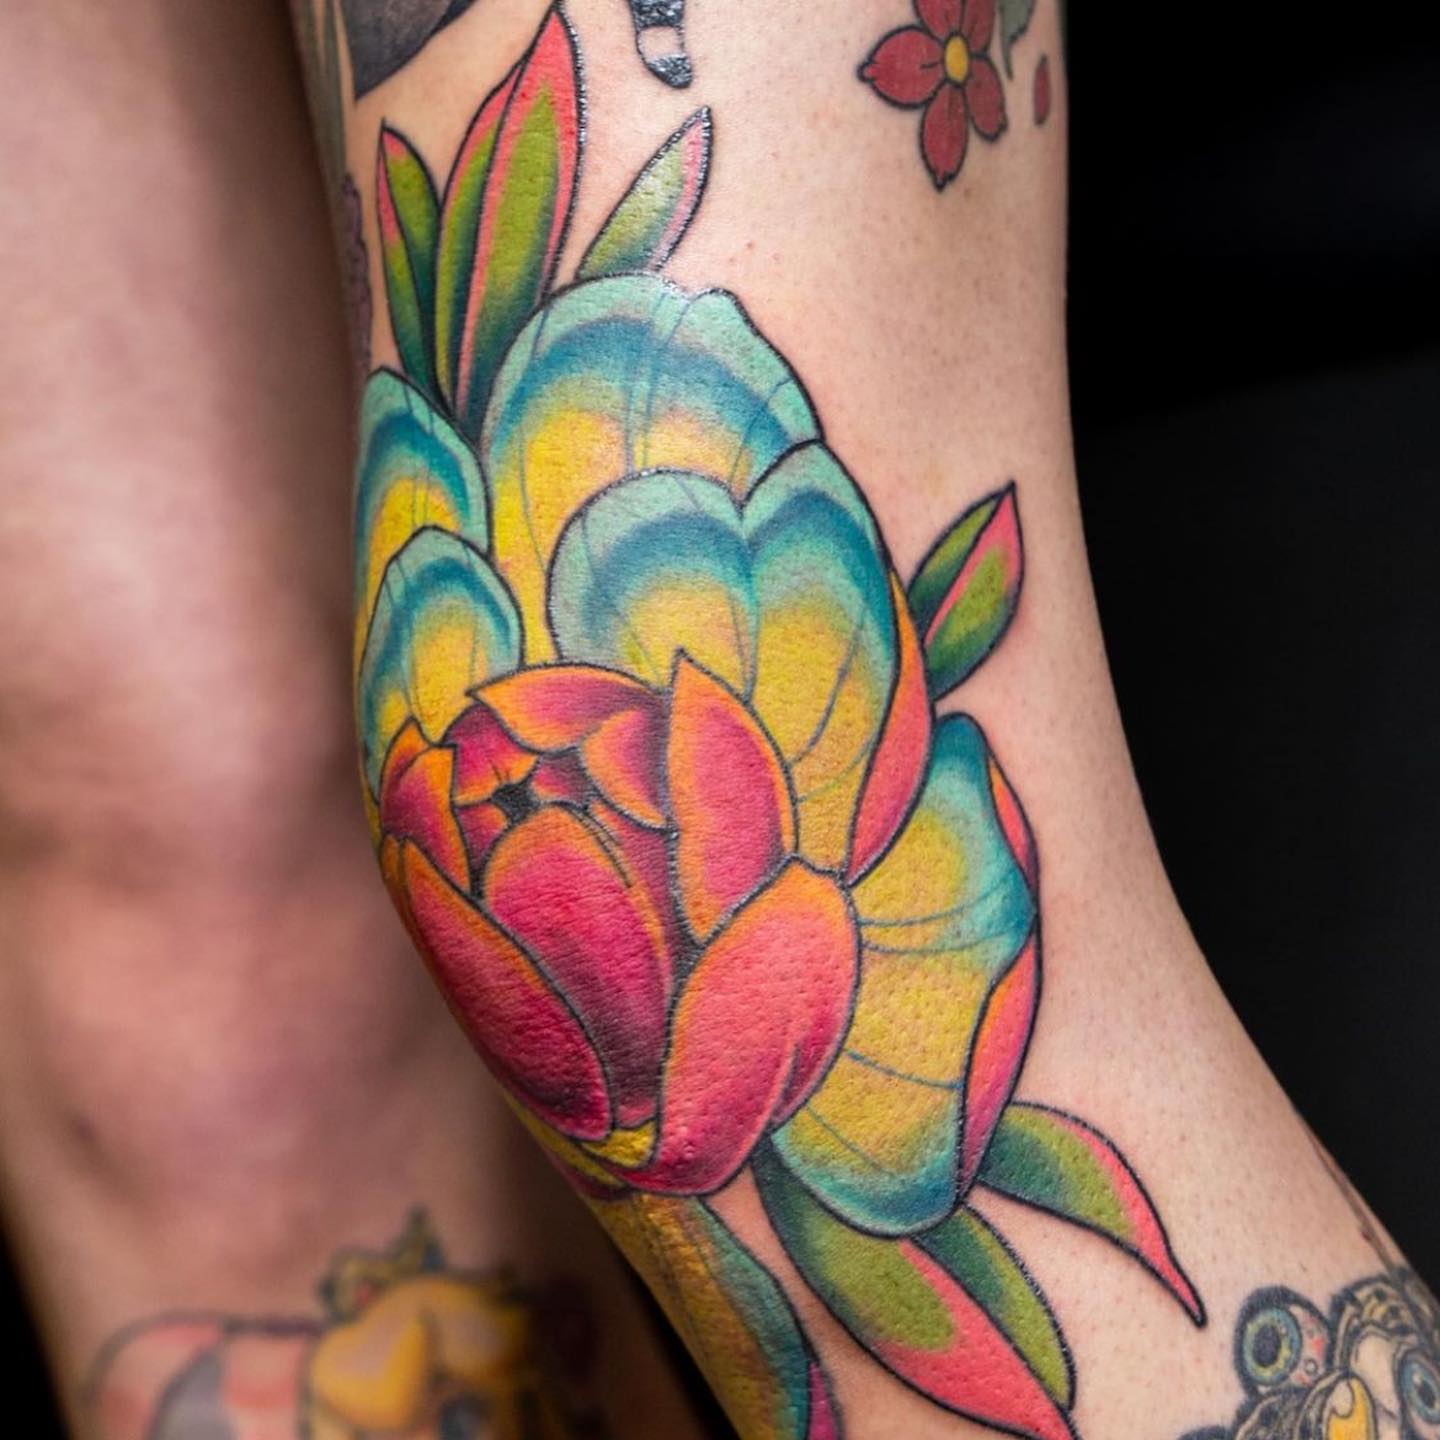 Flowers are used to symbolizing our inner nature. If you’re close to your feelings and you’re someone who likes bright pastel looks, why not book this design? For a lot of guys, it can symbolize renewal, new opportunities, as well as inner peace that they’ve found. The end result is colorful, but it is a true masterpiece.